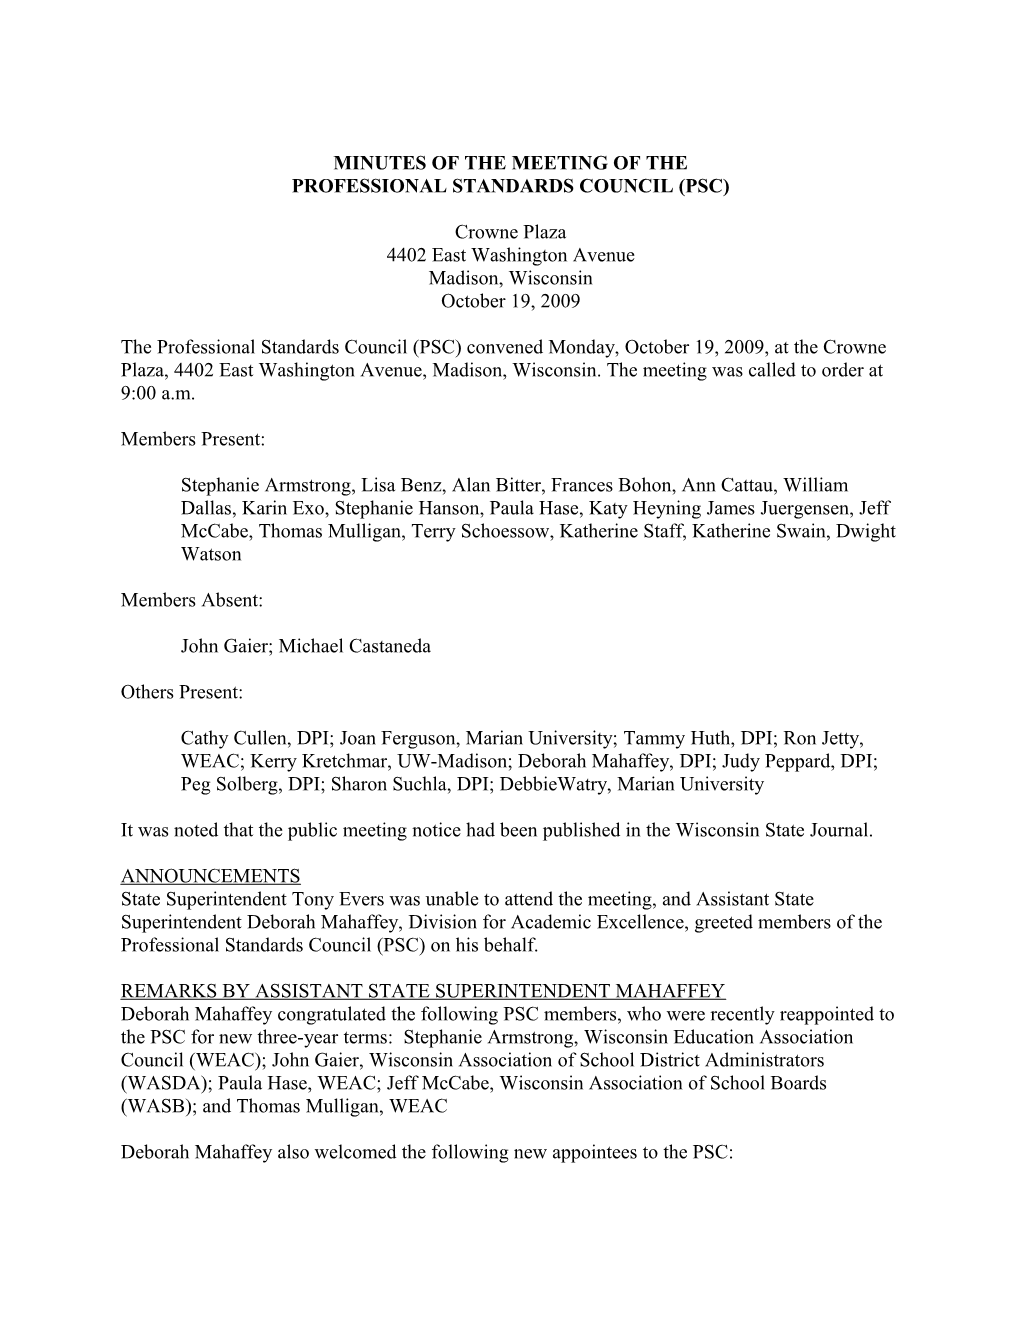 Minutes of the October 19, 2009, Meeting of the PSCT